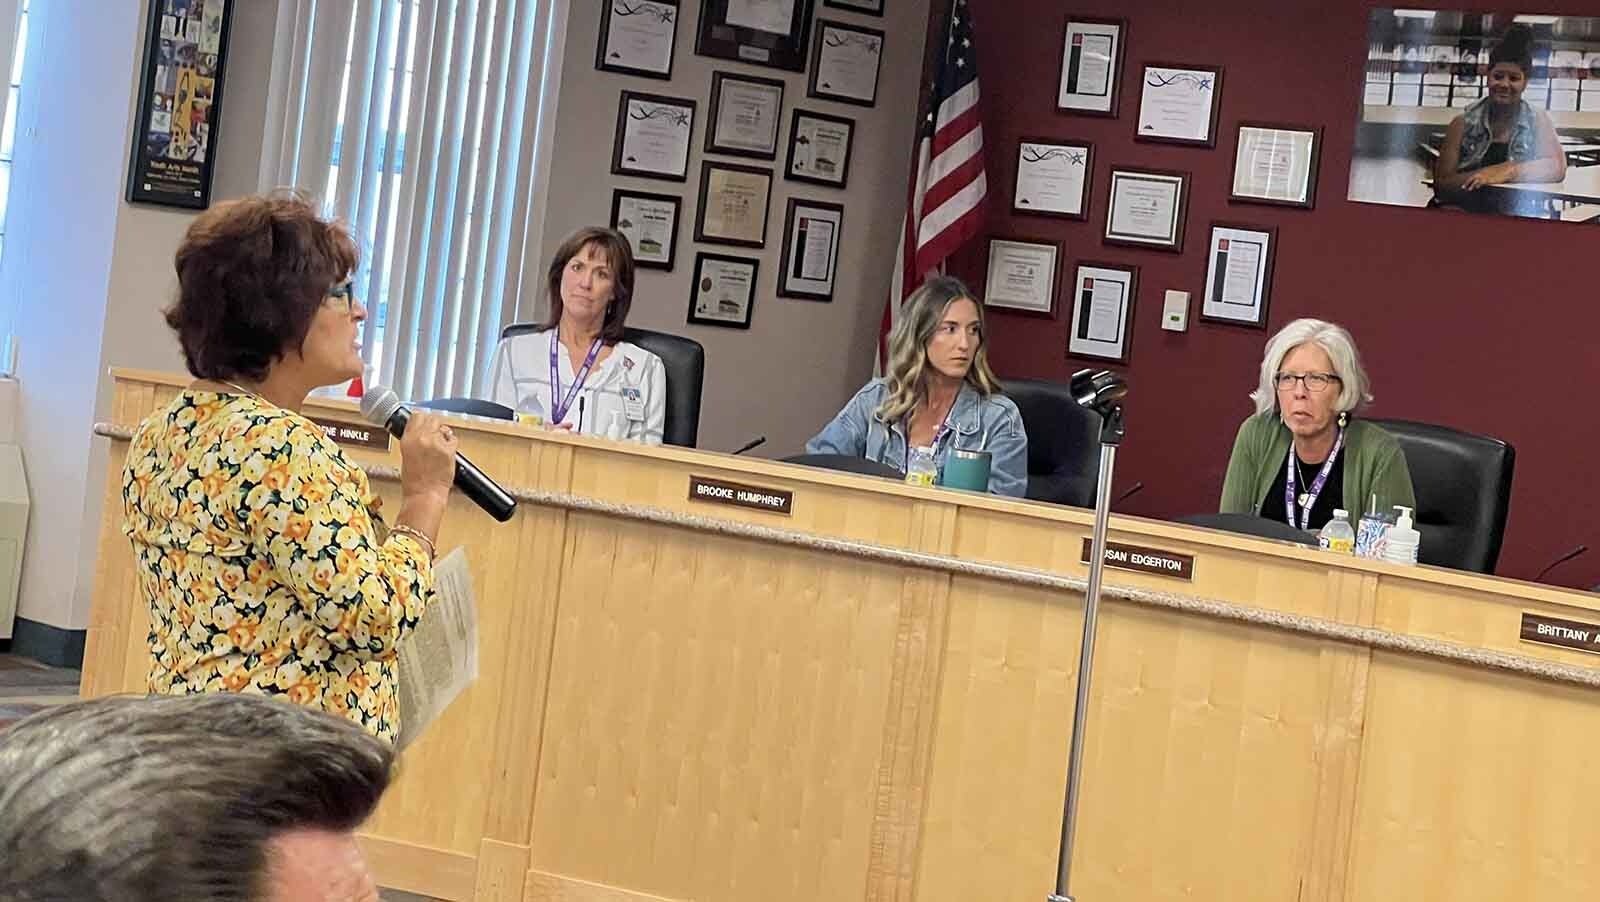 Carla Gregorio, a former principal in Laramie County School District 1, addresses the school board about the resignation of Superintendent Margaret Crespo amid allegations she created a hostile work environment.